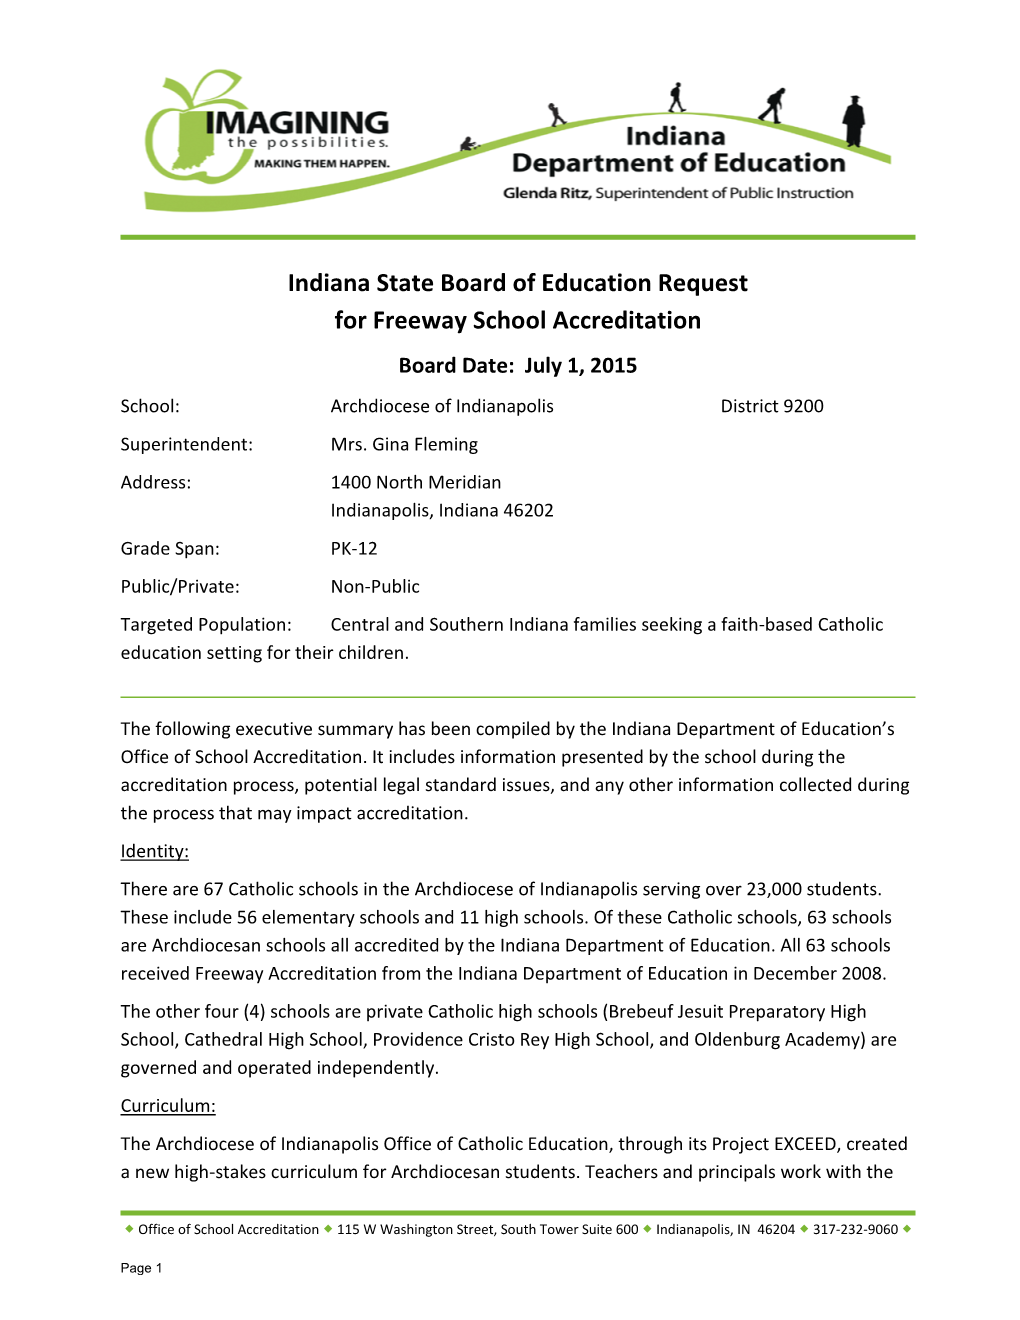 Indiana State Board of Education Request for Freeway School